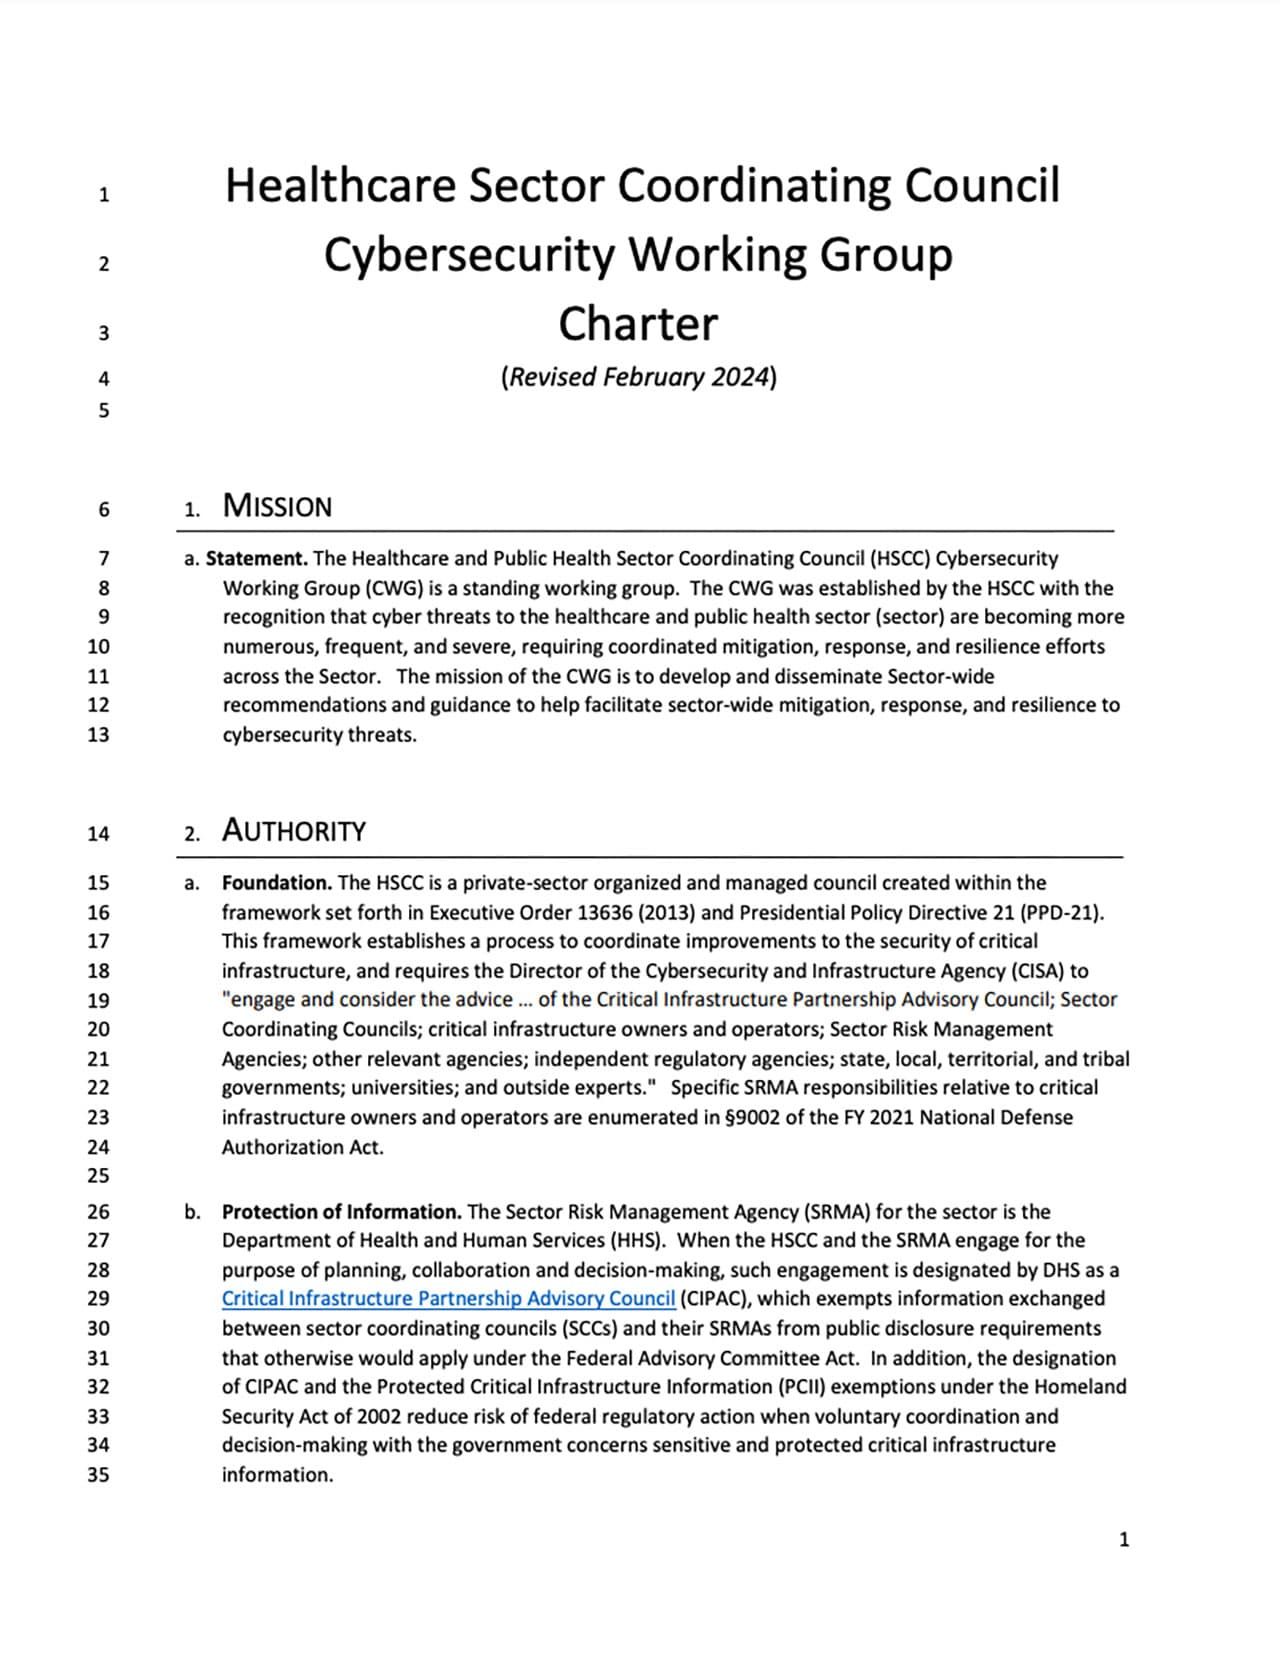 Healthcare Sector Coordinating Council Cybersecurity Working Group Charter